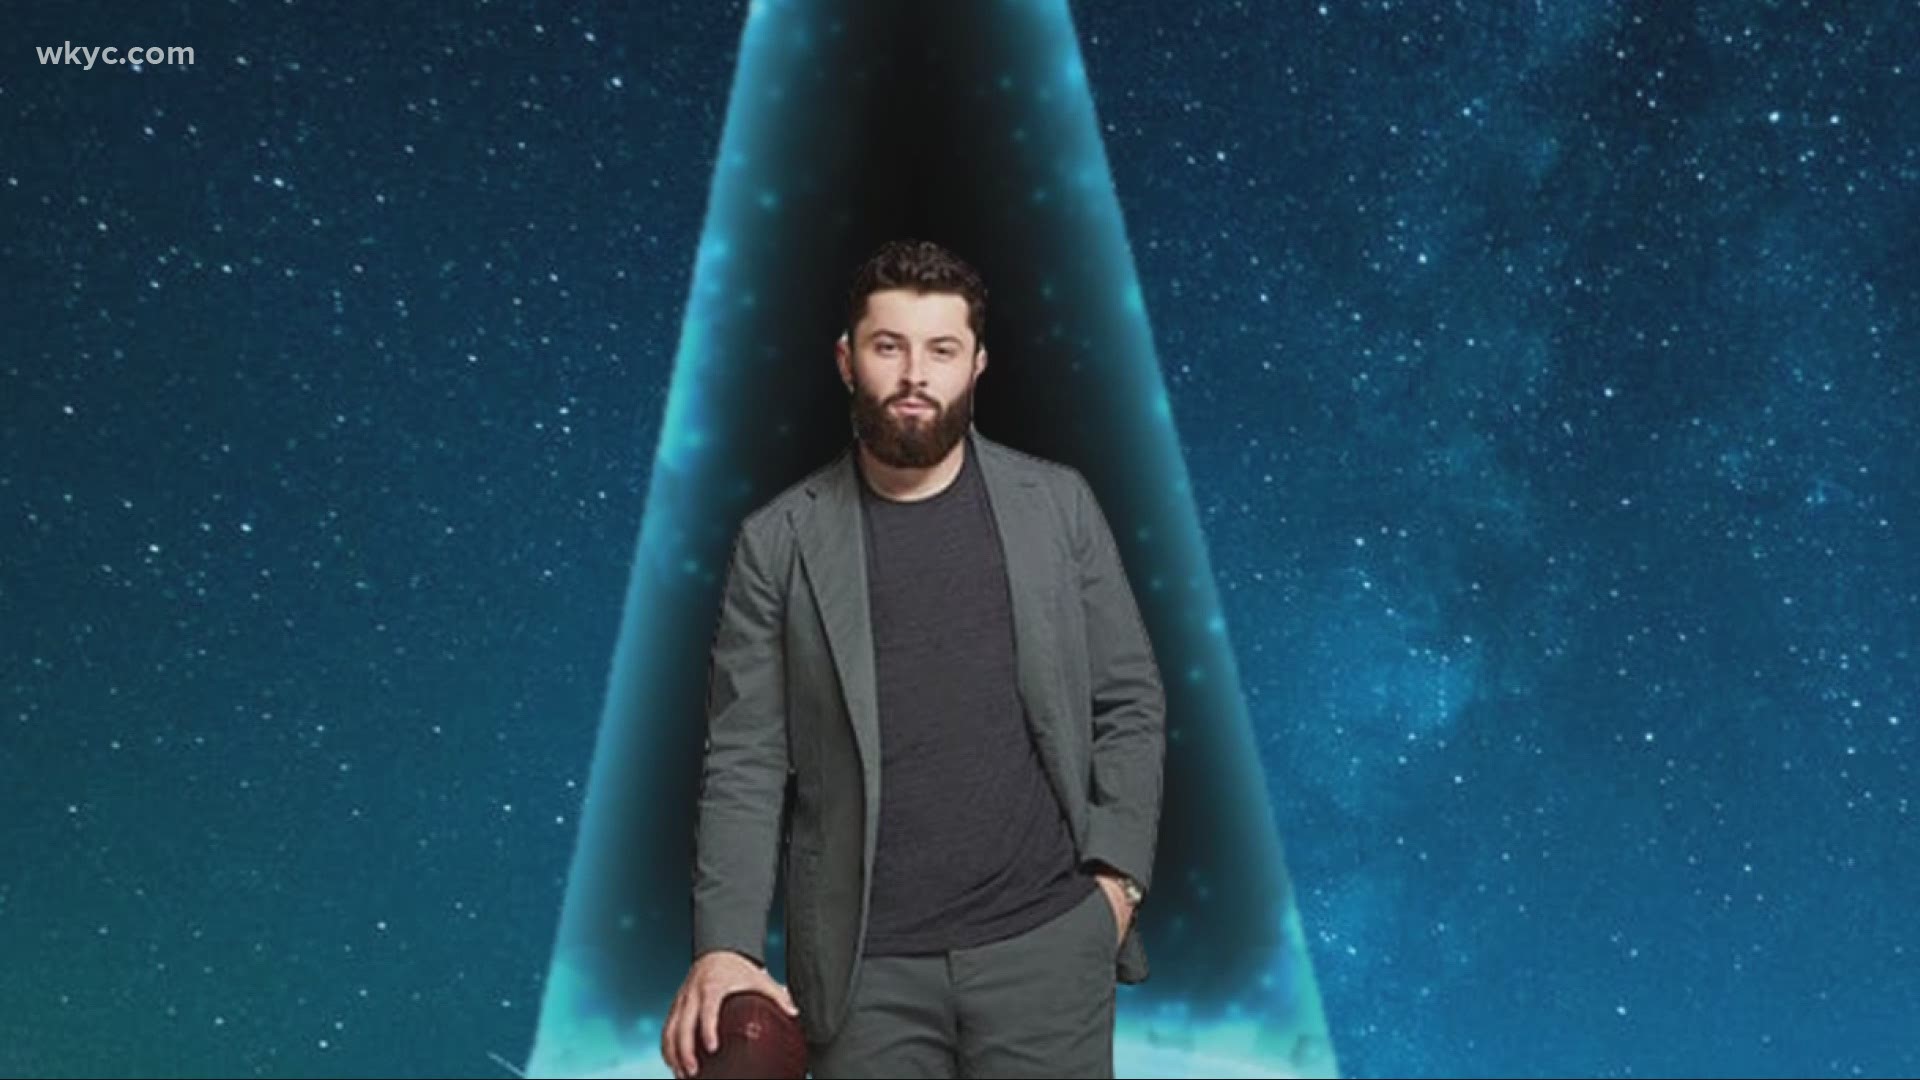 Baker Mayfield and his wife put out a tweet last night about seeing a UFO.  Mike Polk Jr. has more on this story.